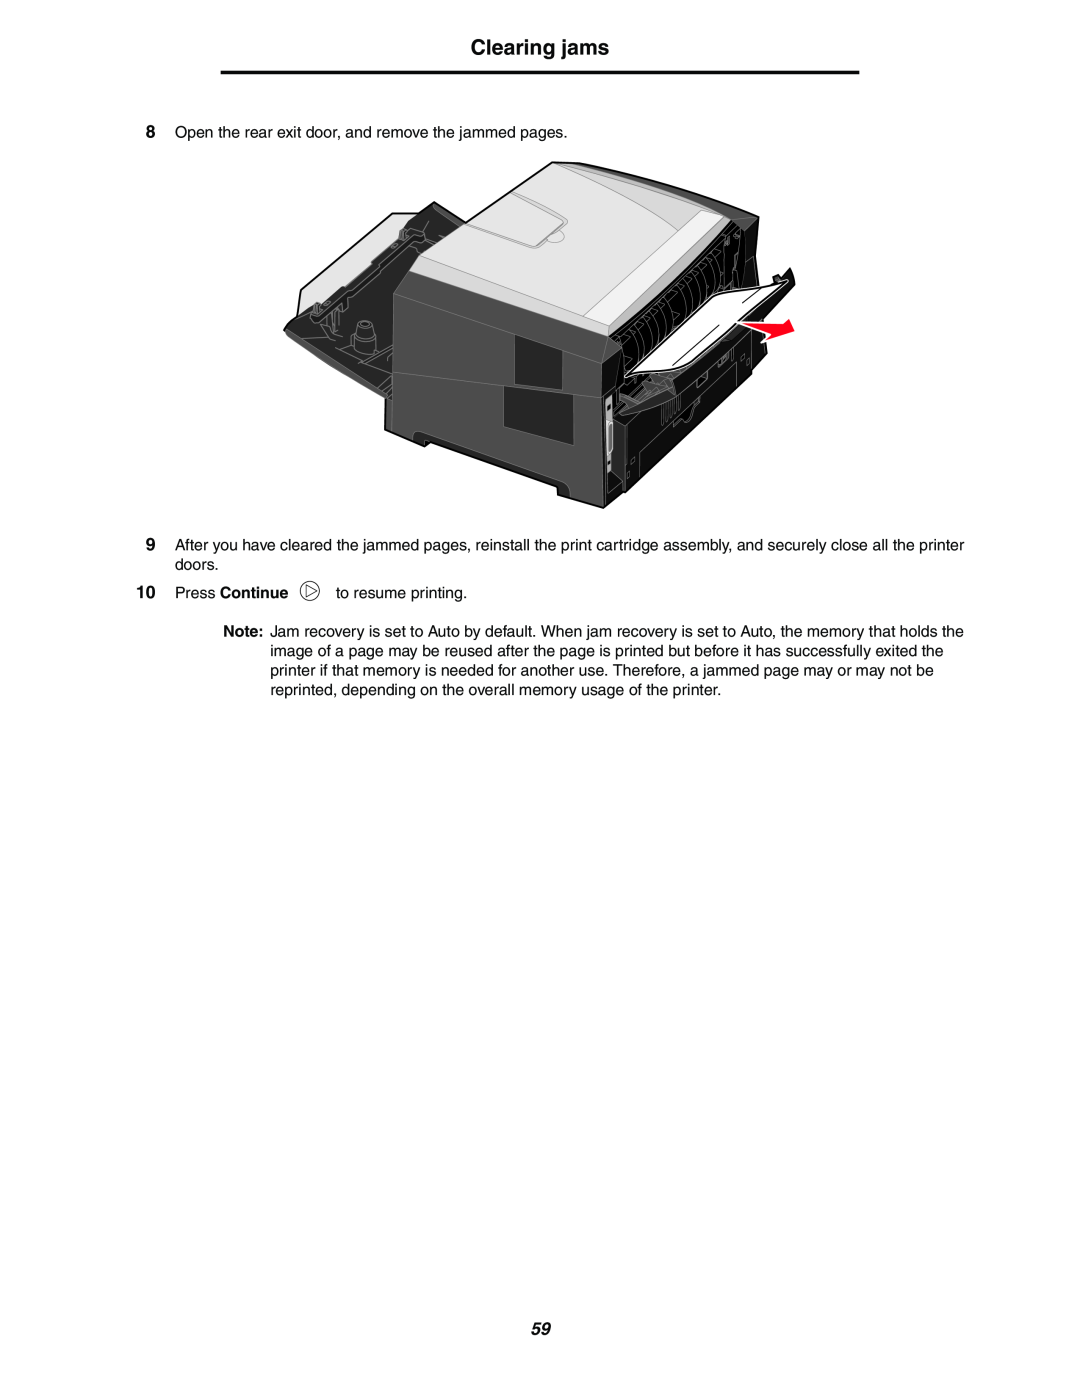 Lexmark 250dn manual Clearing jams, Open the rear exit door, and remove the jammed pages 